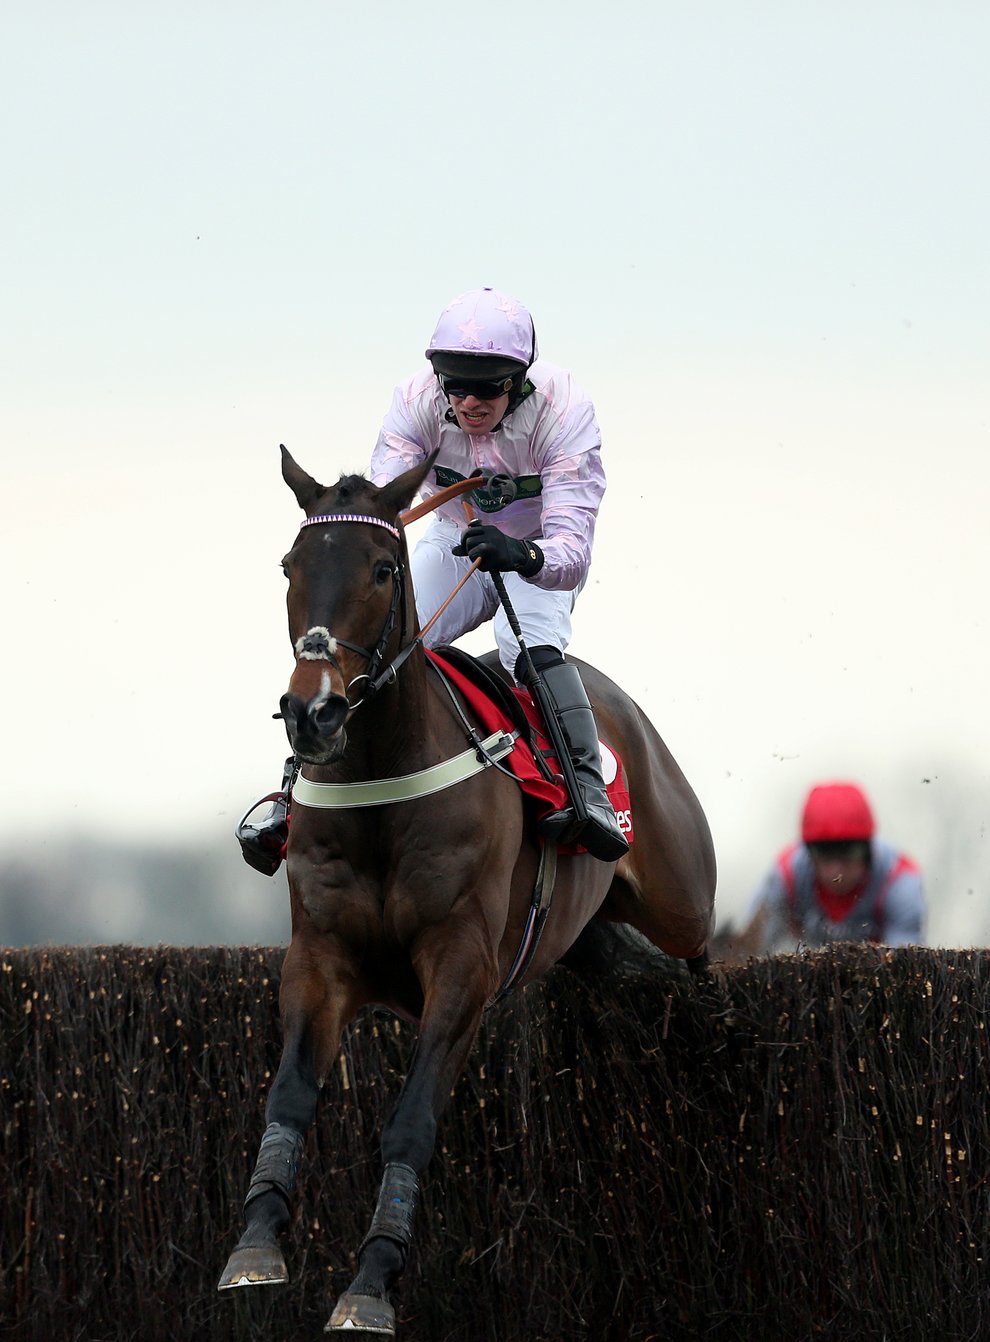 Global Citizen is likely to make his next appearance at the Ladbrokes Winter Carnival at Newbury